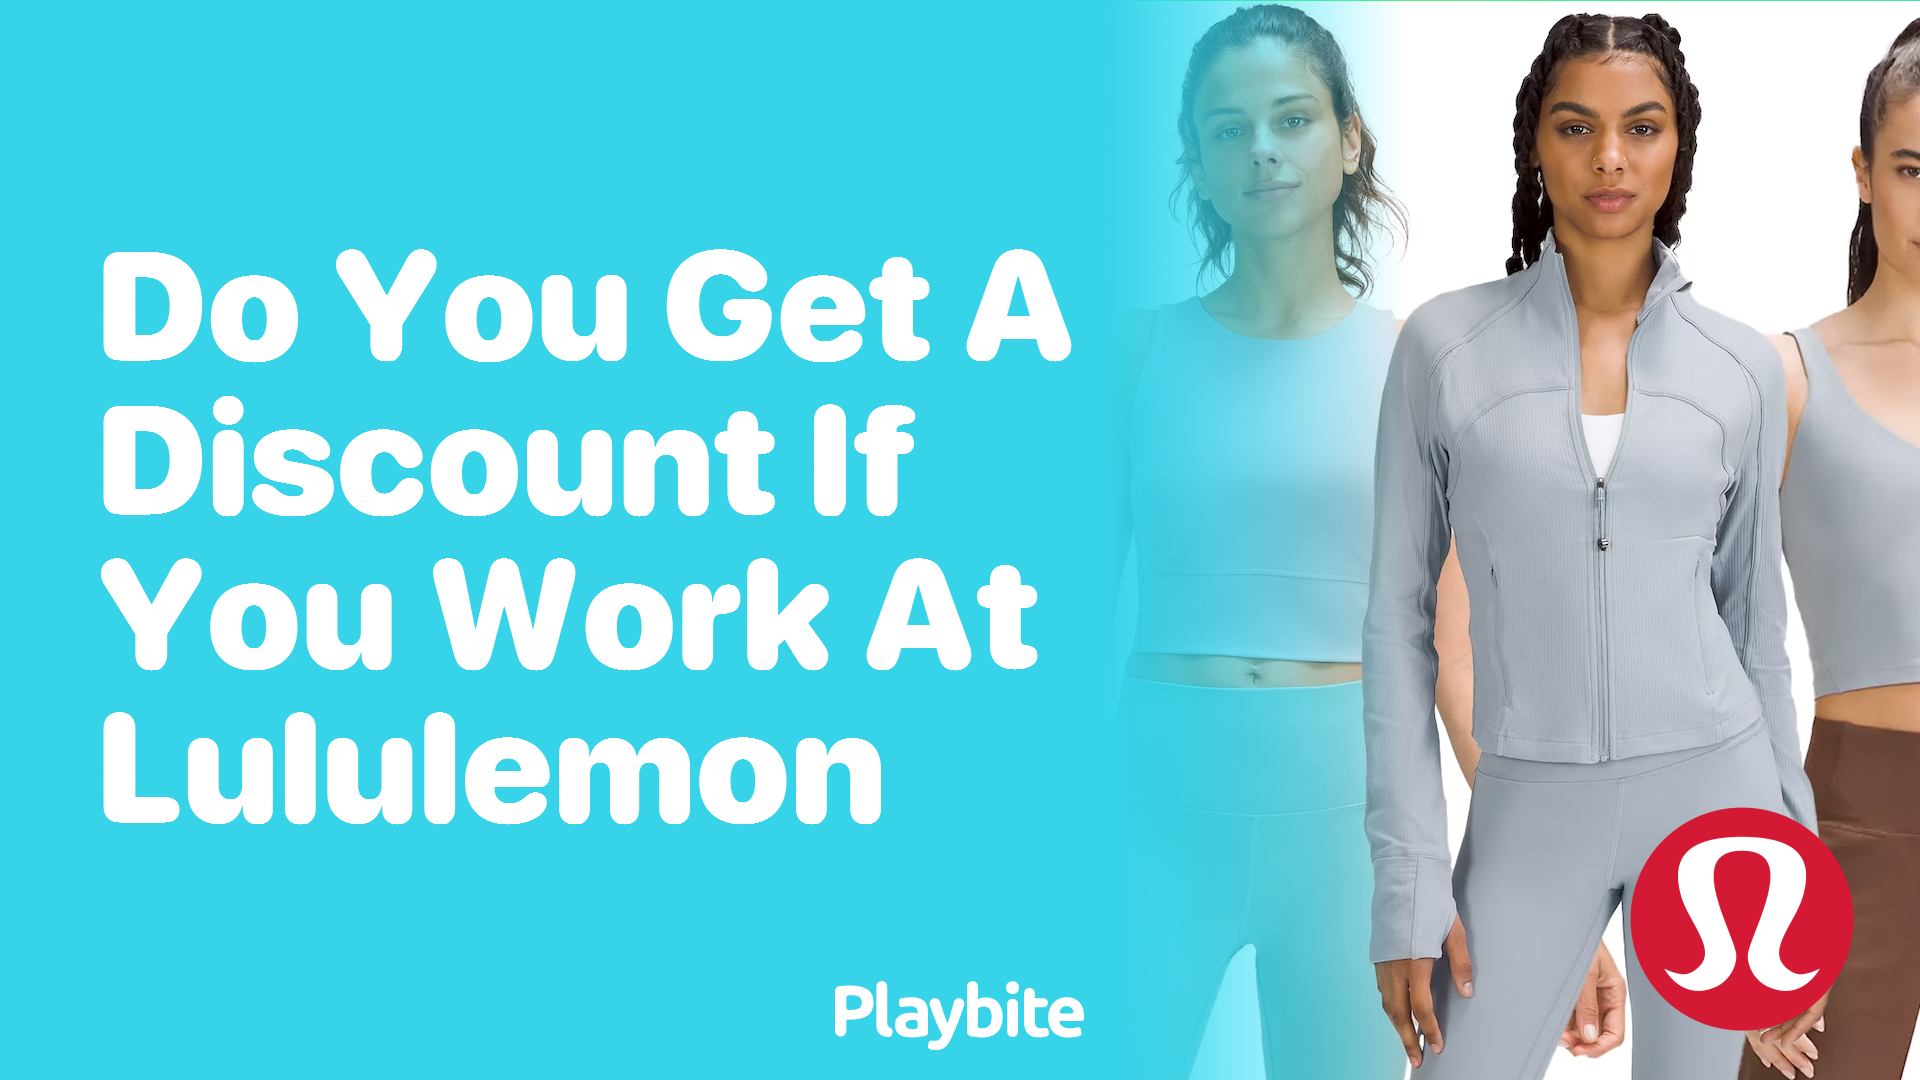 Do You Get a Discount If You Work at Lululemon? - Playbite